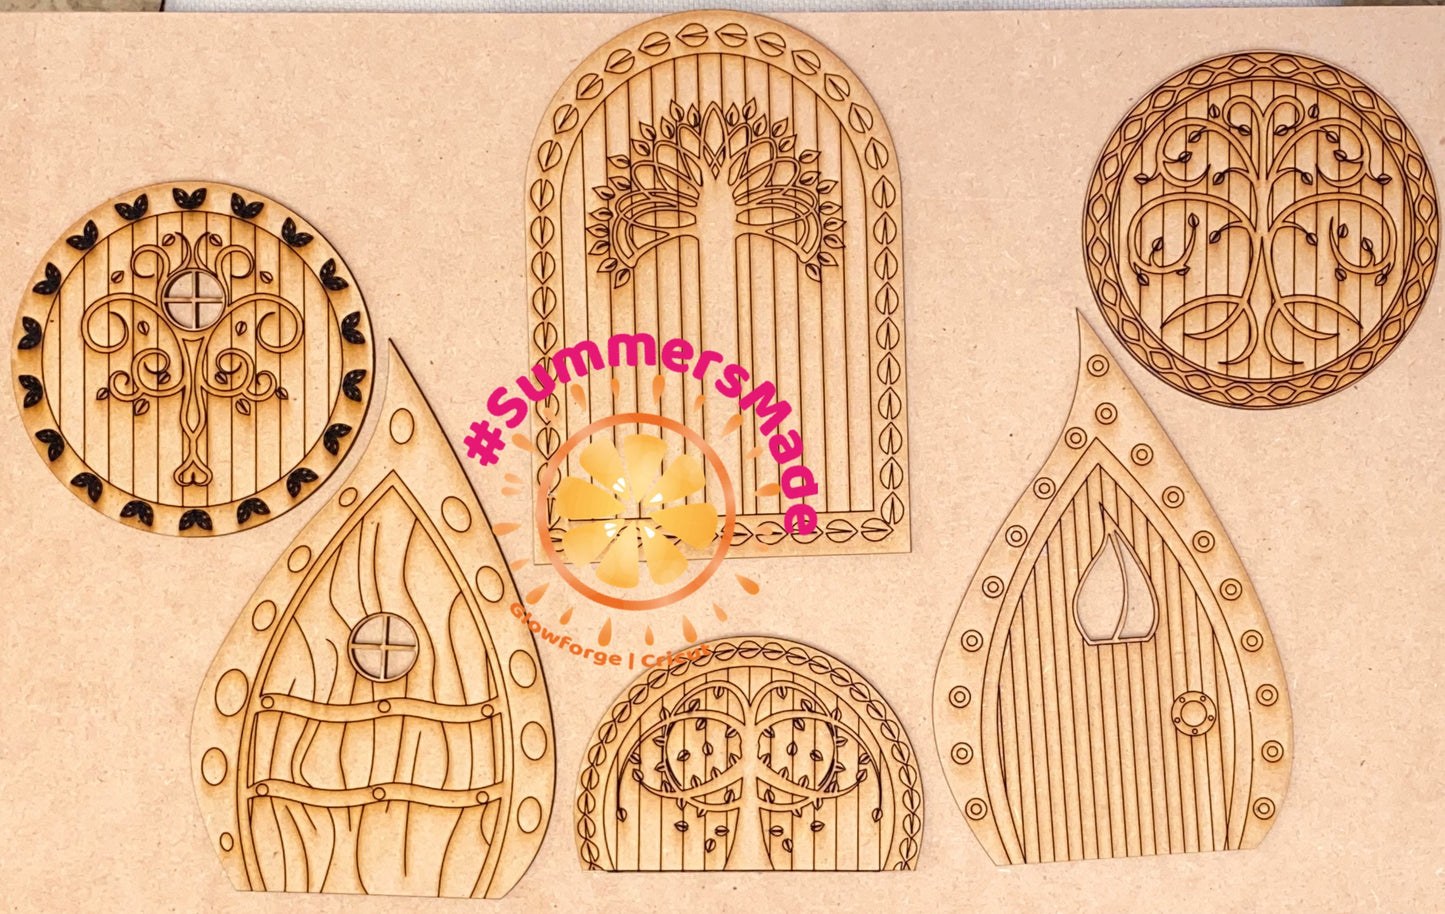 SVG Digital File: V4 Fairy Doors Volume Four - 6 Fairy Doors to laser cut and decorate